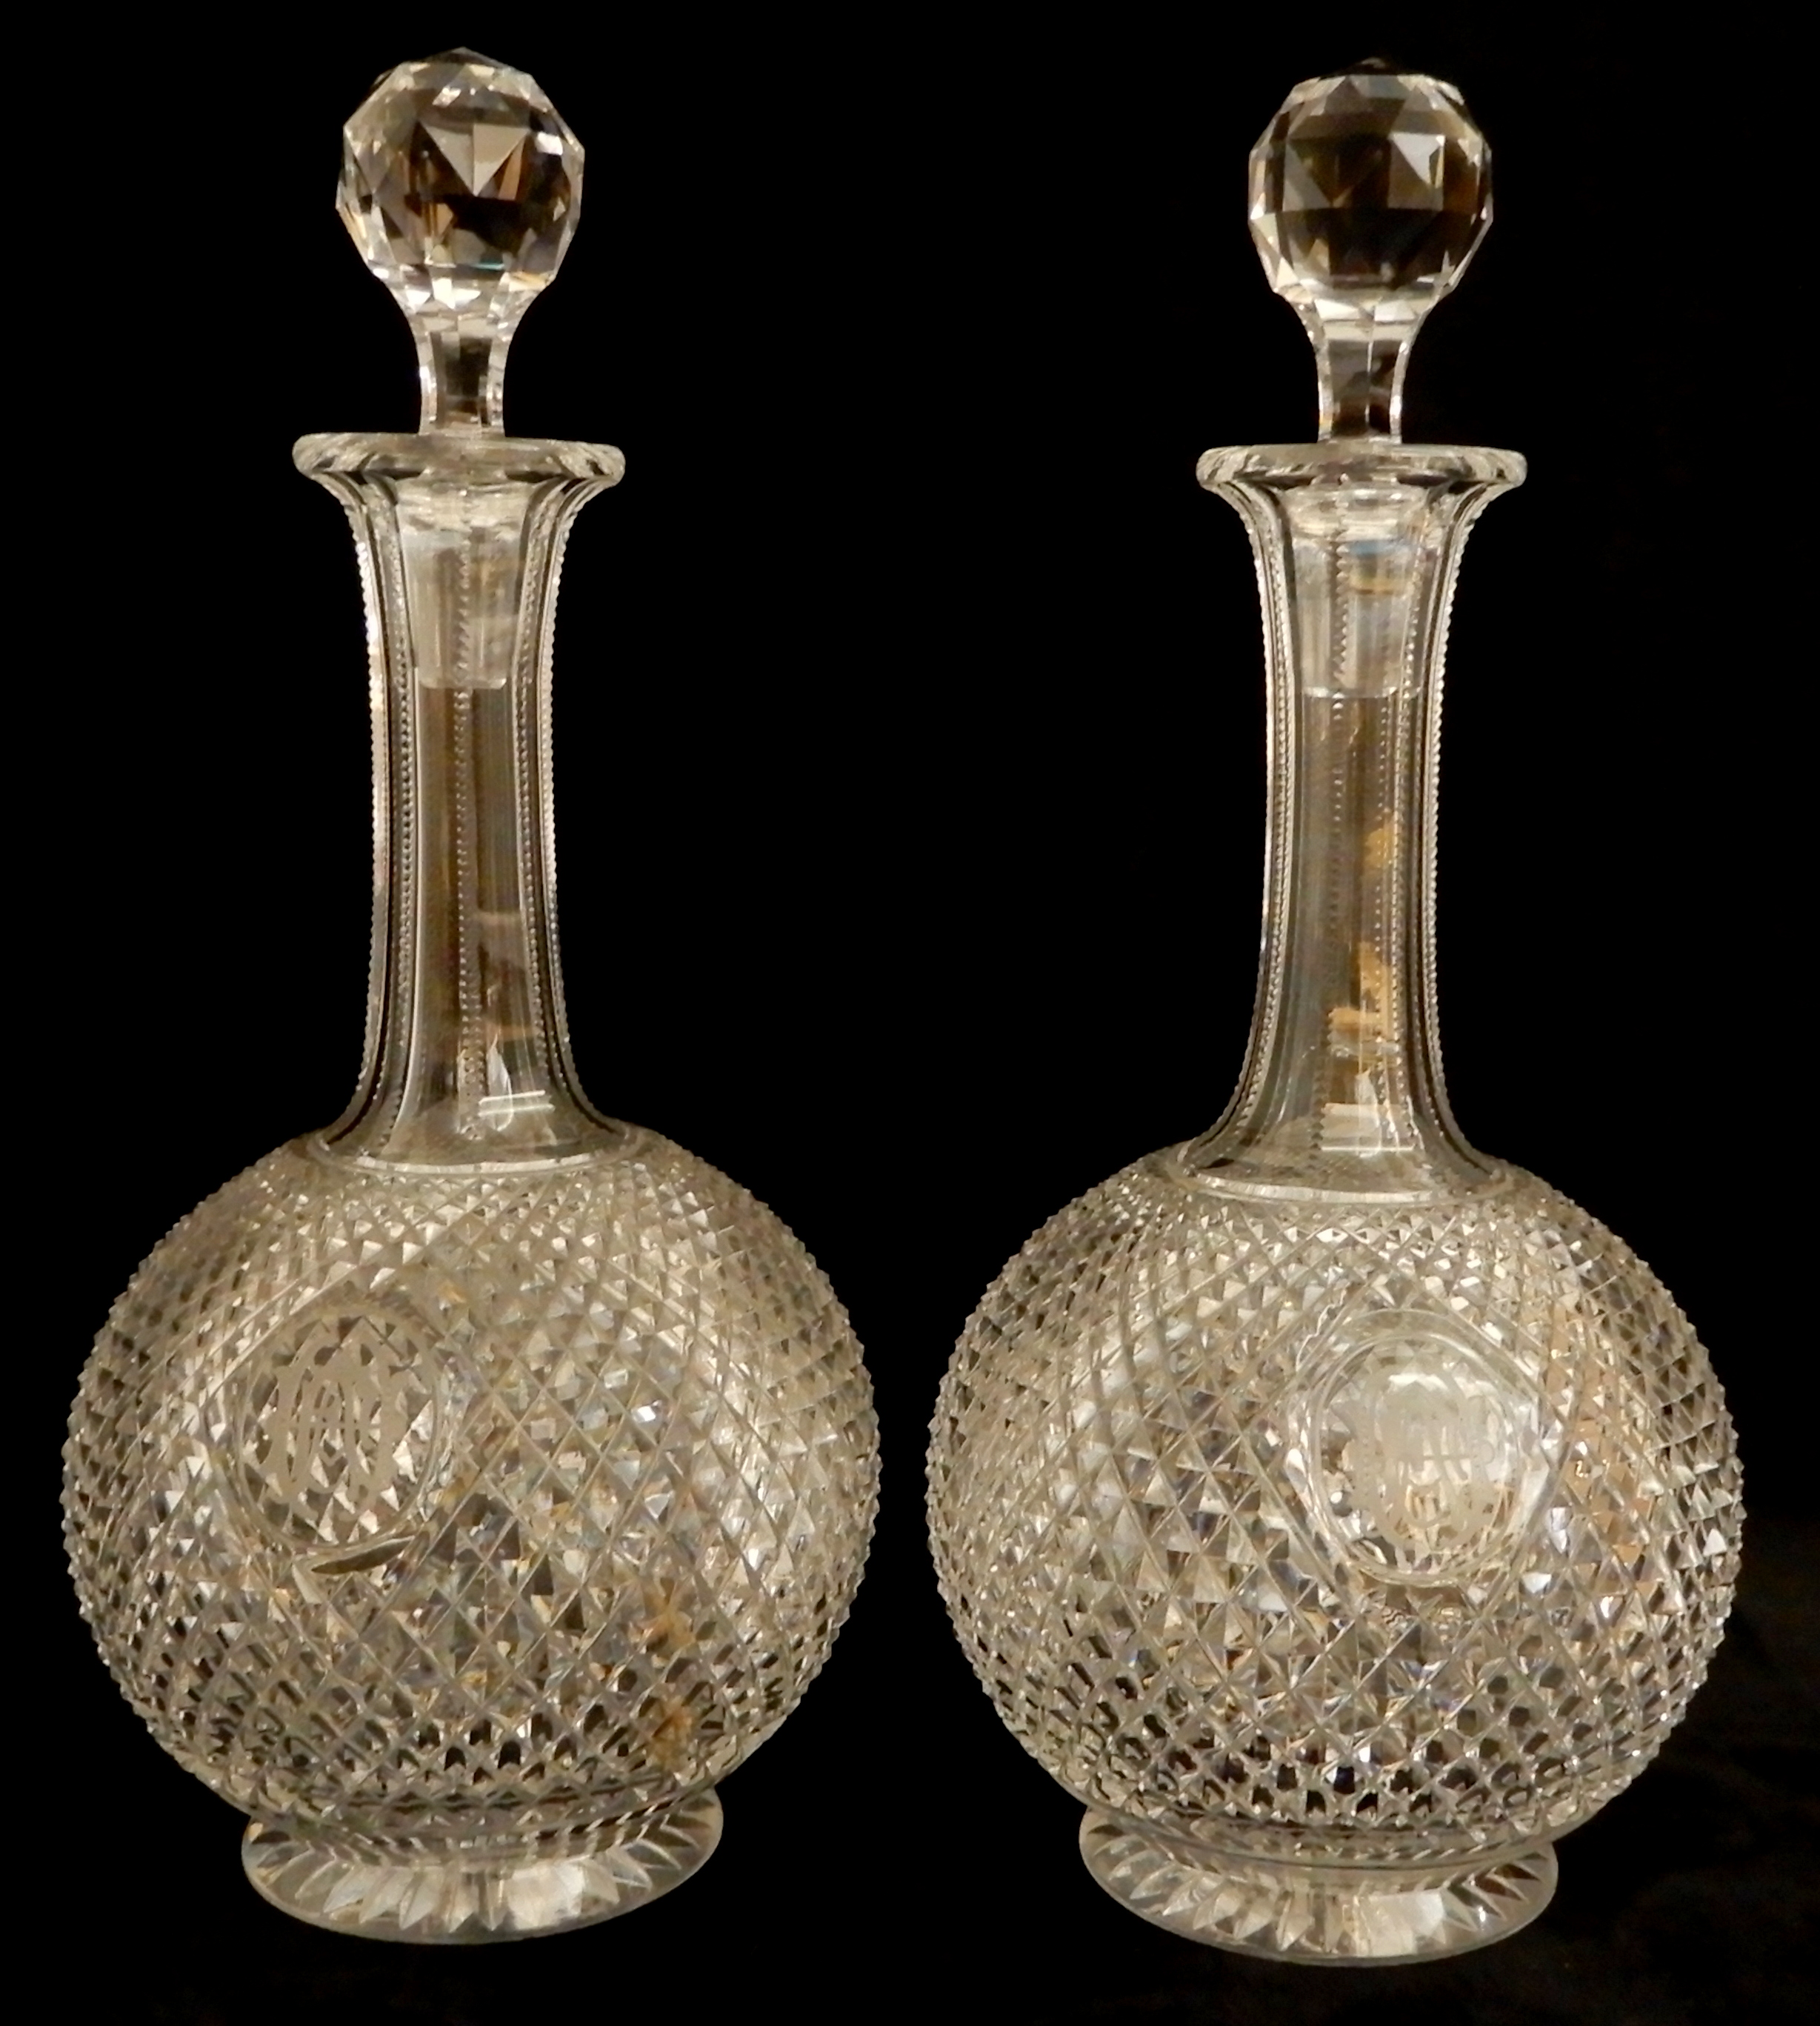 A SUITE OF LATE 19TH CENTURY DIAMOND CUT CRYSTAL comprising six large tumblers, 14.5cm high, fifteen - Image 23 of 24